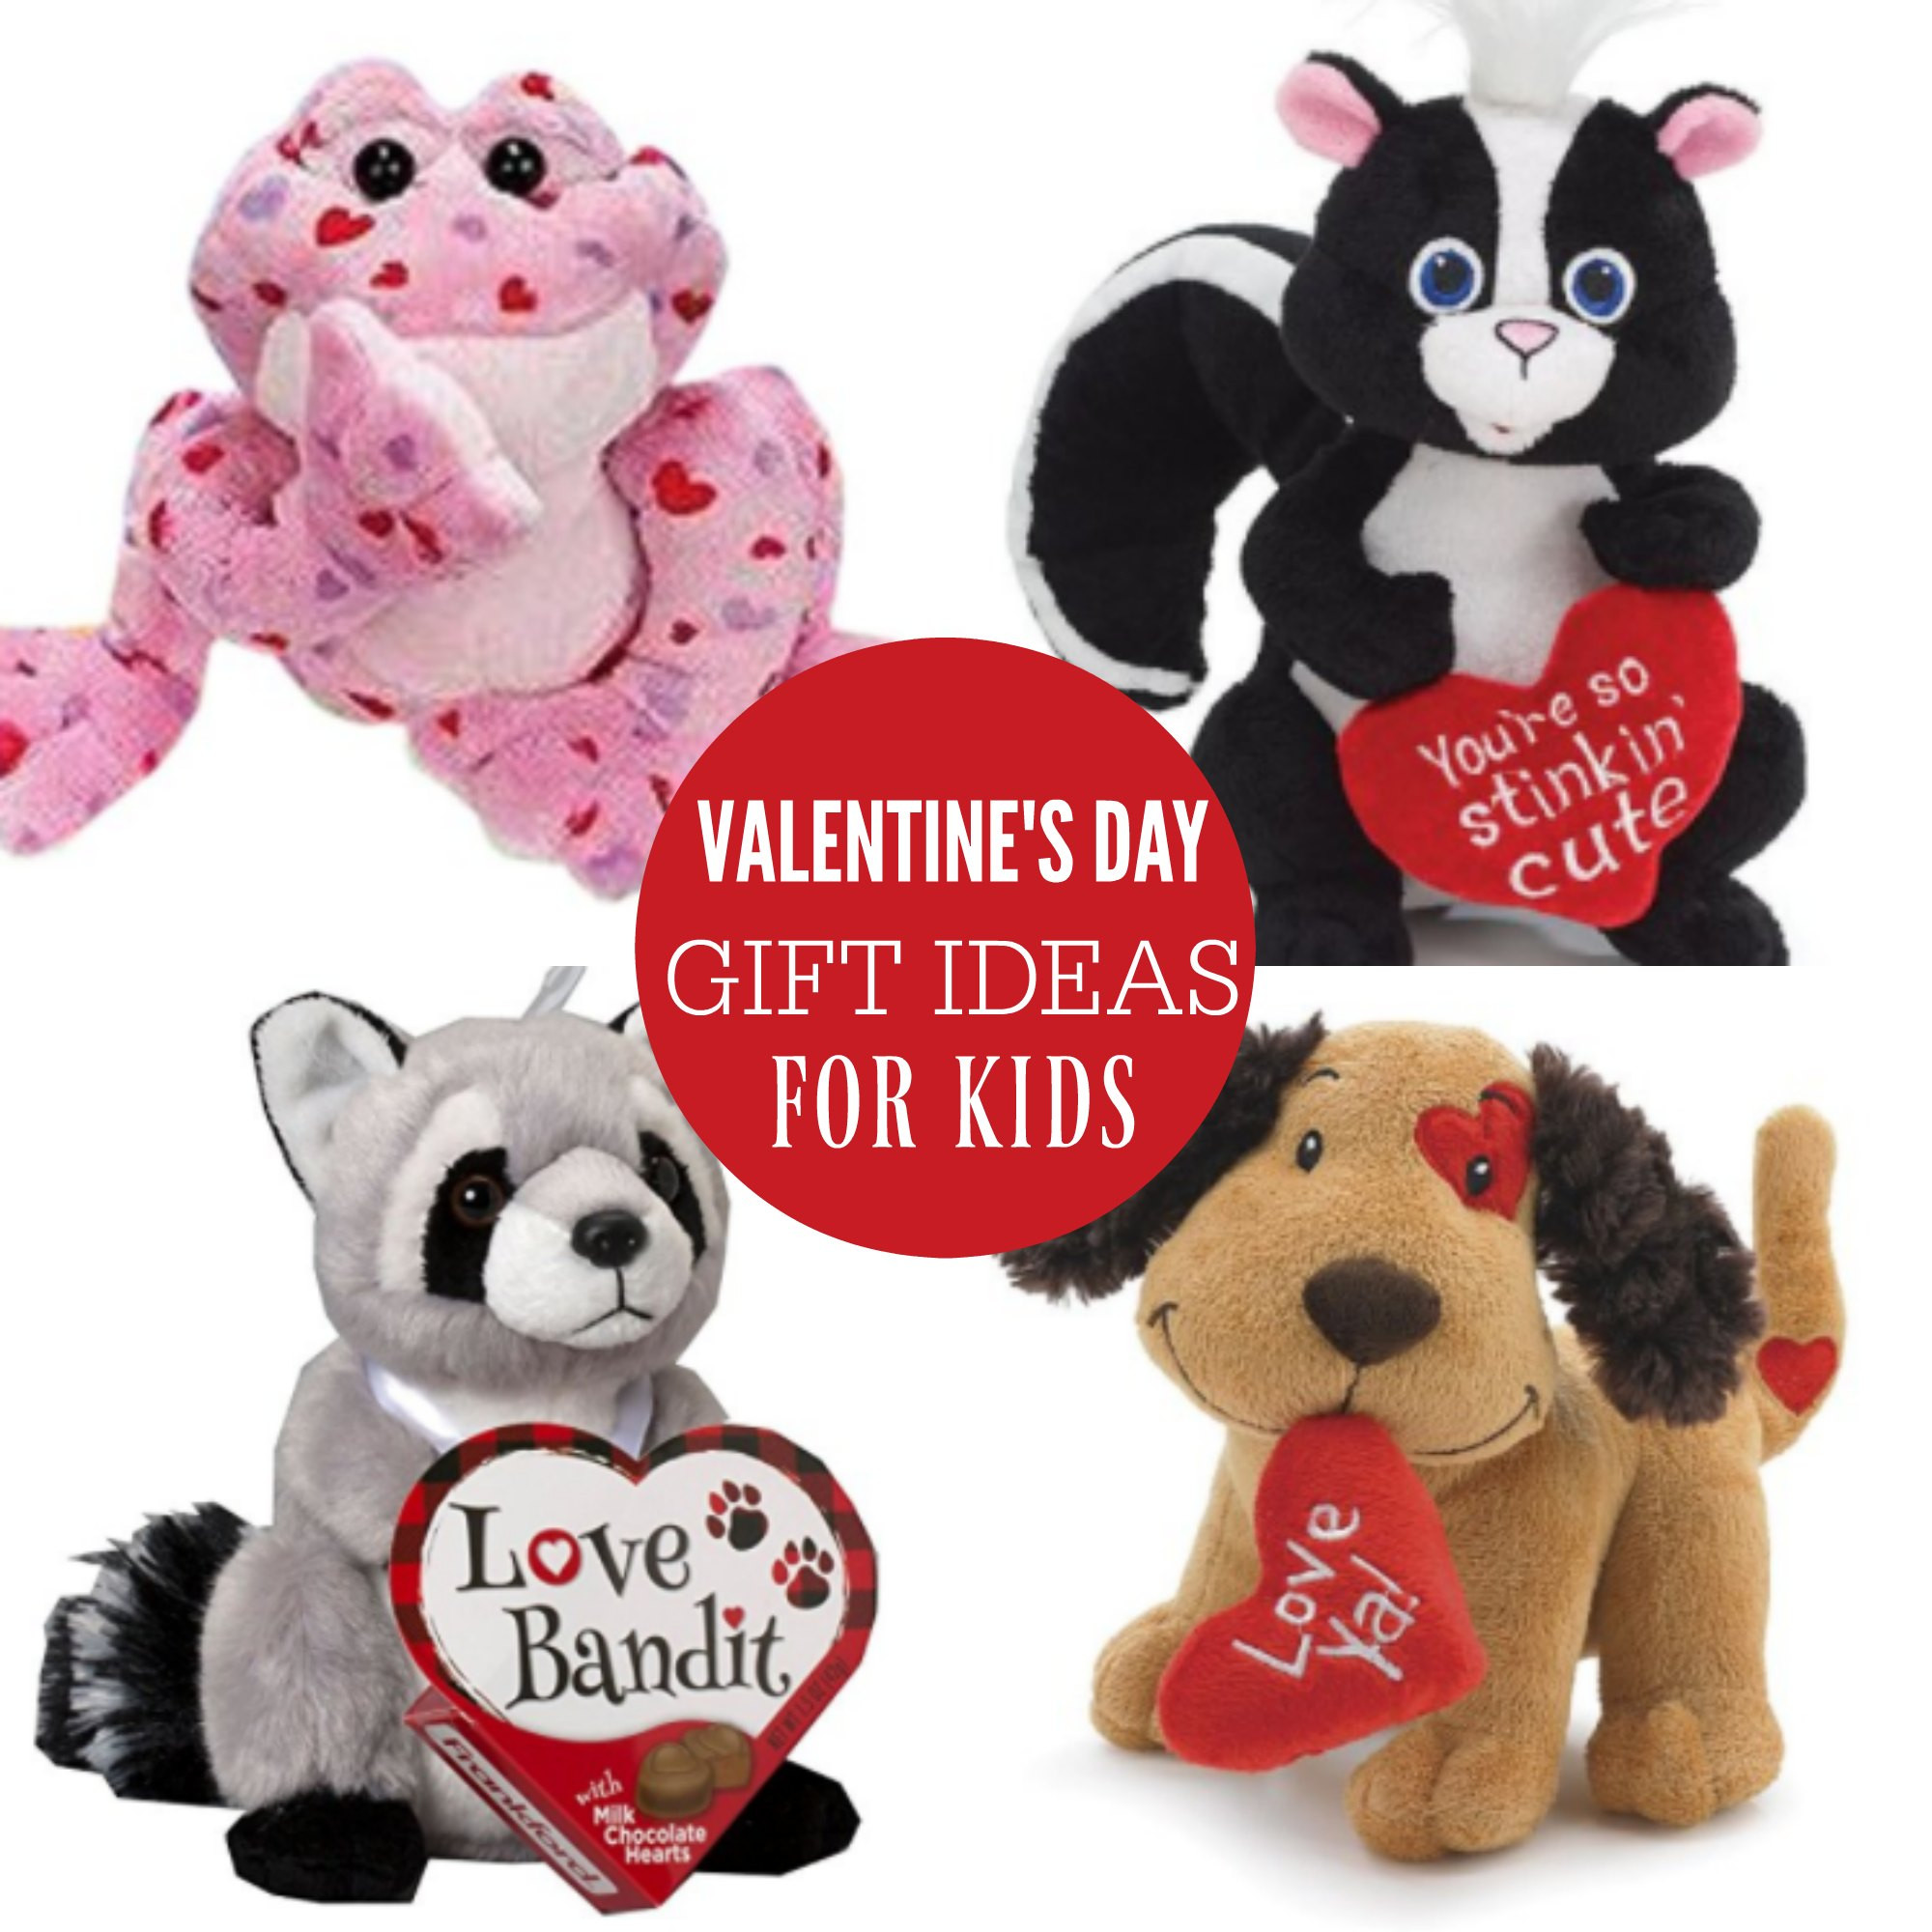 Toddler Valentine Gift Ideas
 Valentine Gift ideas for Kids That they will love e